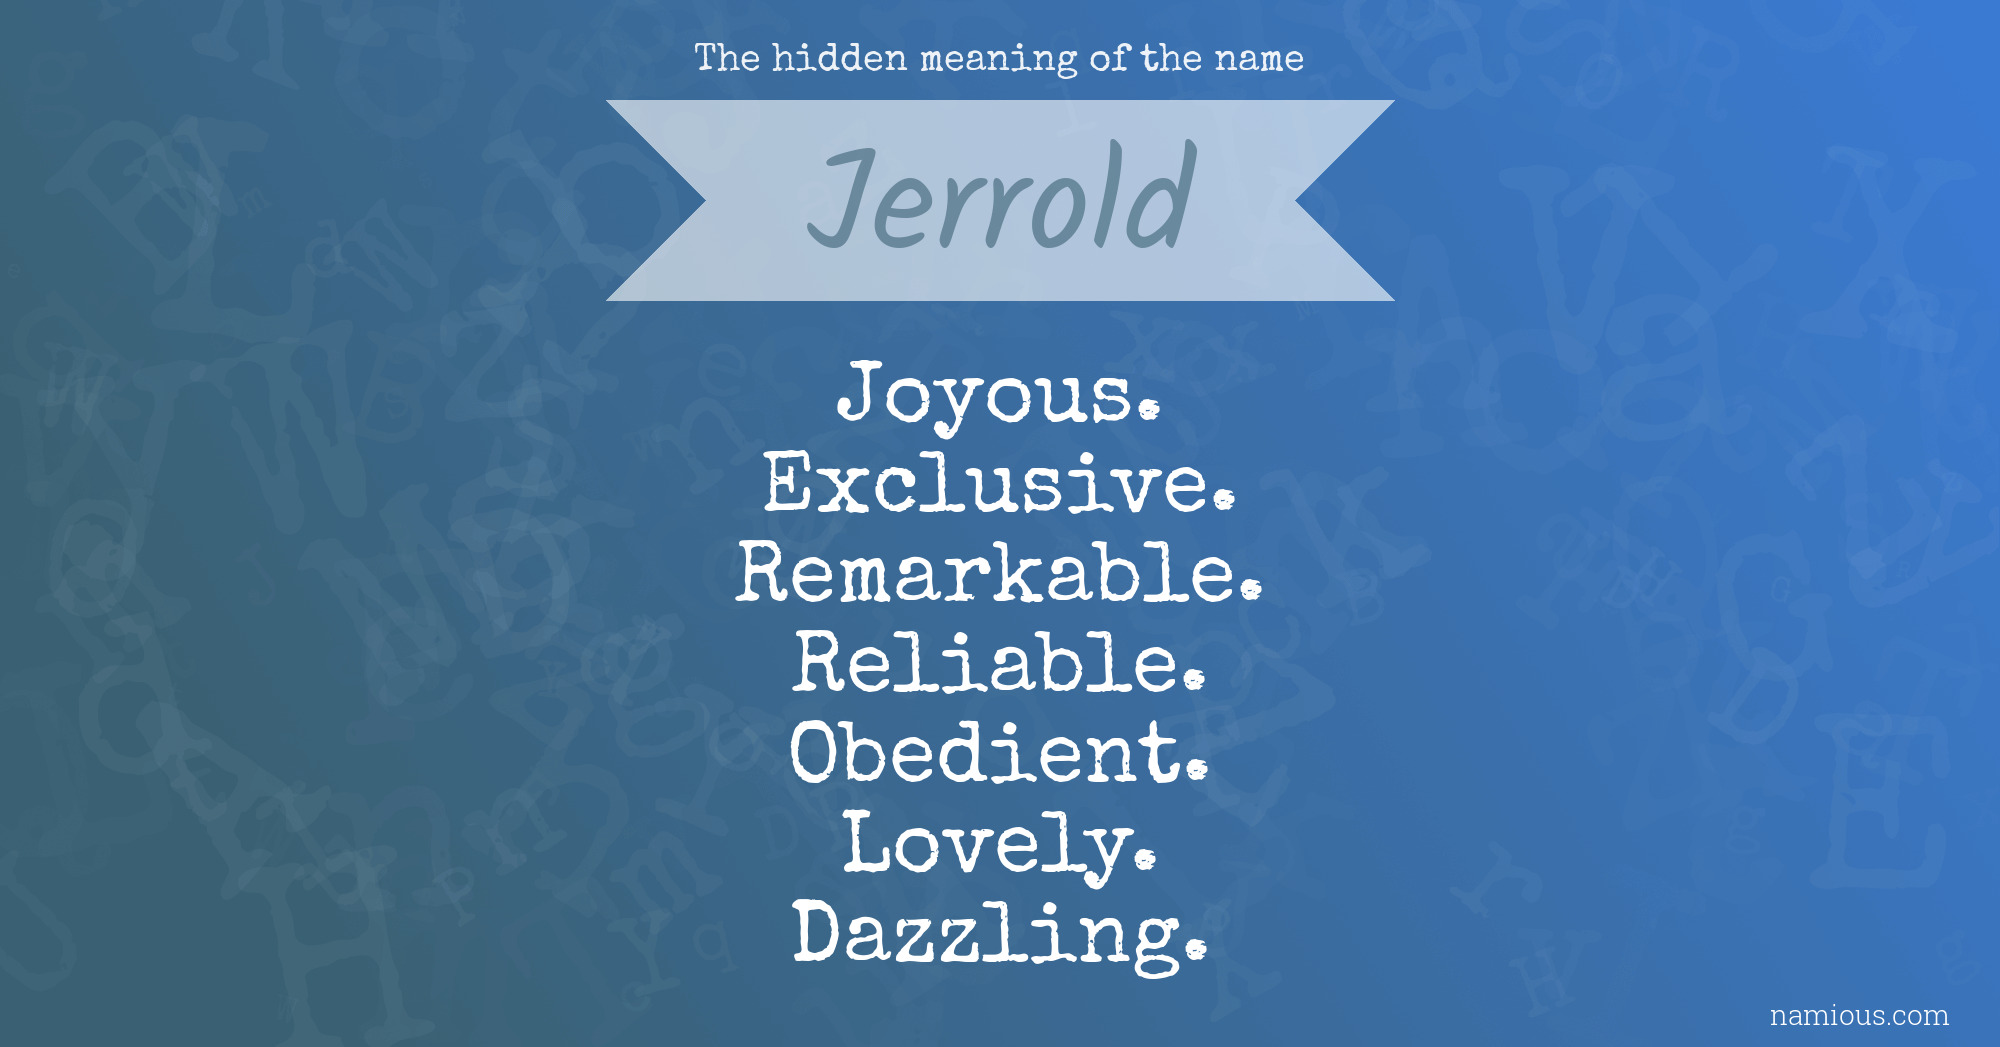 The hidden meaning of the name Jerrold